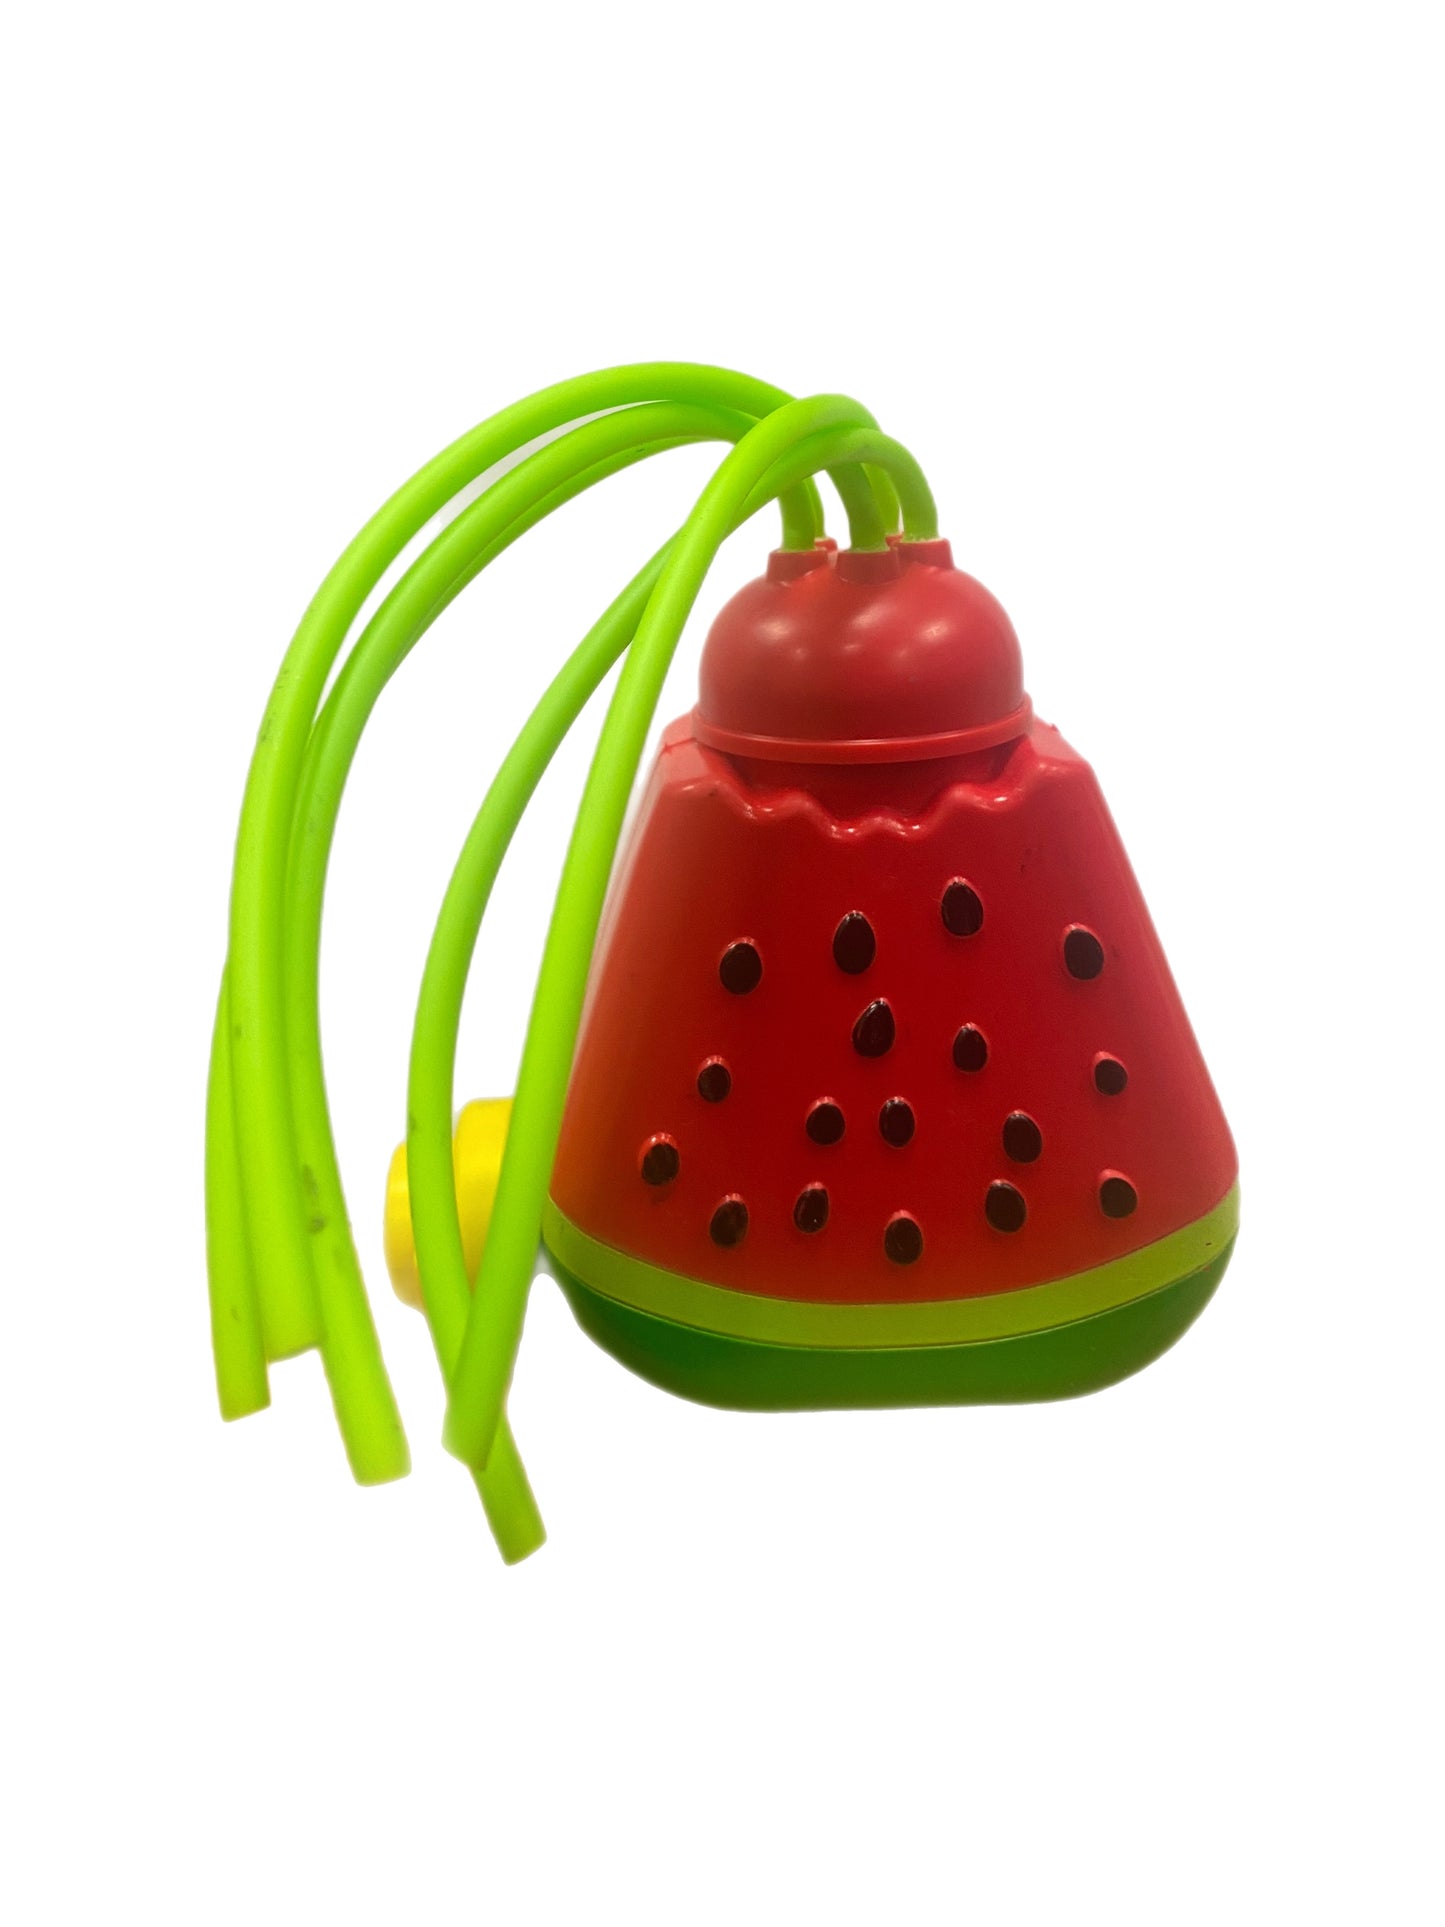 Wiggly Squiggly Summer Sprinkler-Assorted Styles